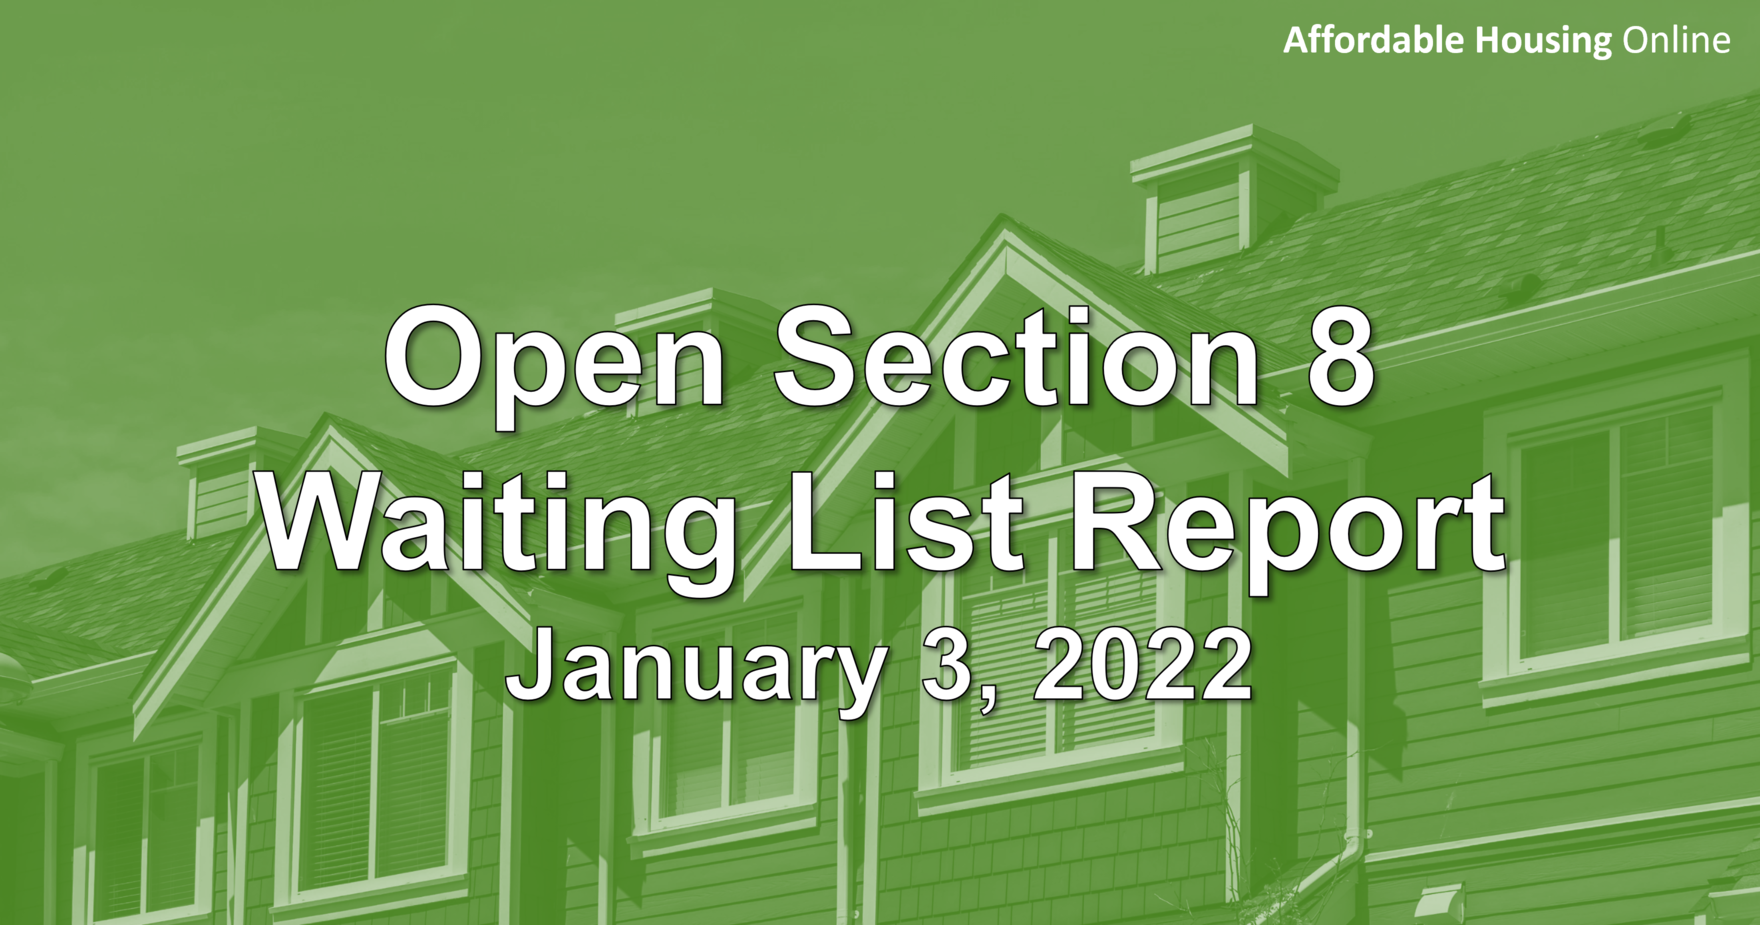 Open Section 8 Waiting List Report January 3, 2022 Affordable